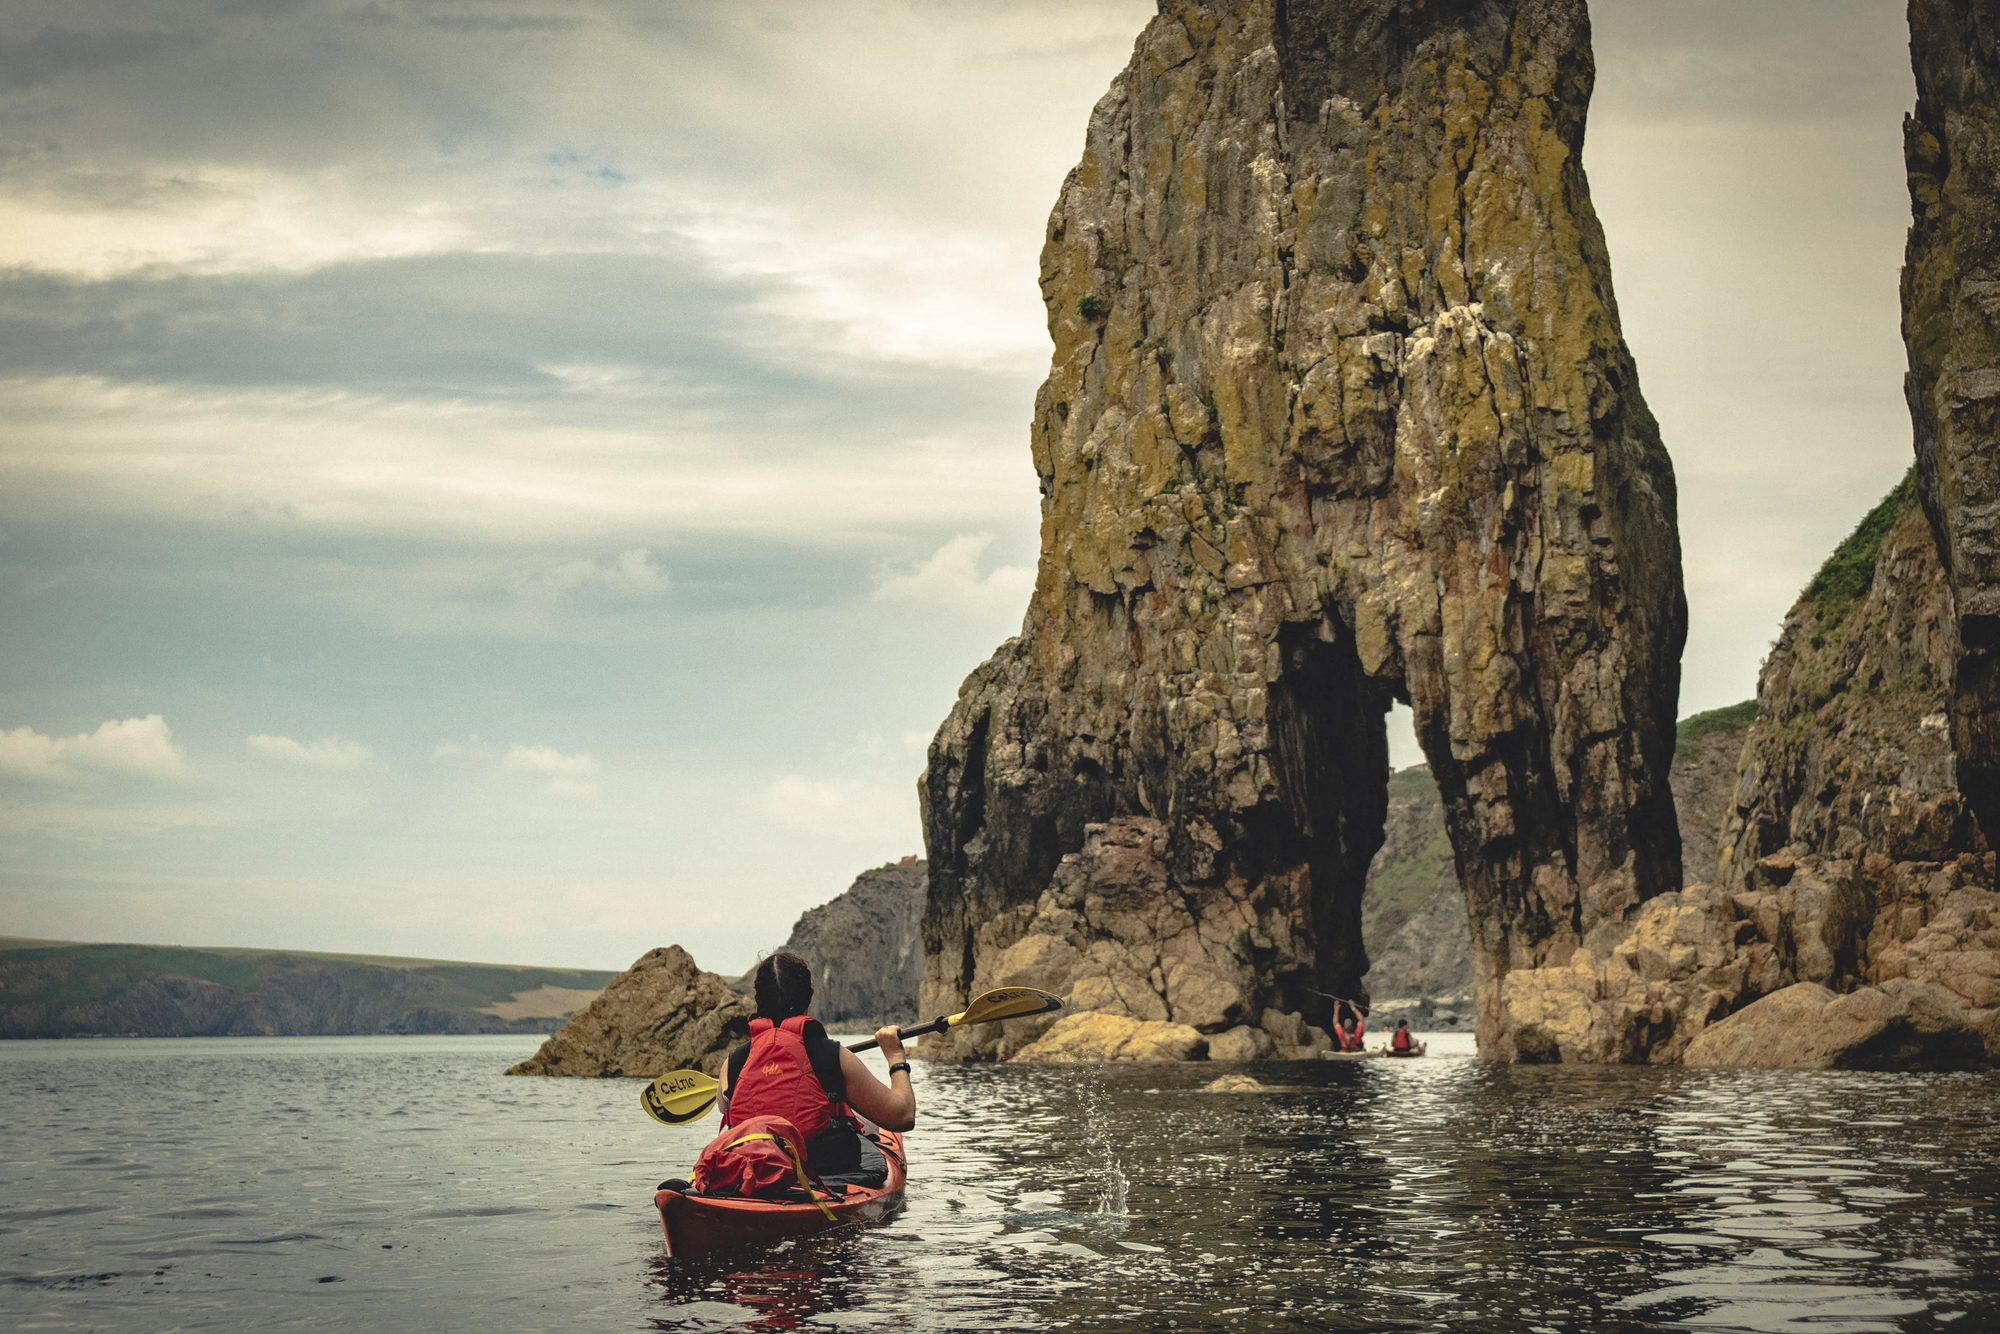 A kayaking group travelling along the Pembrokeshire coastline.